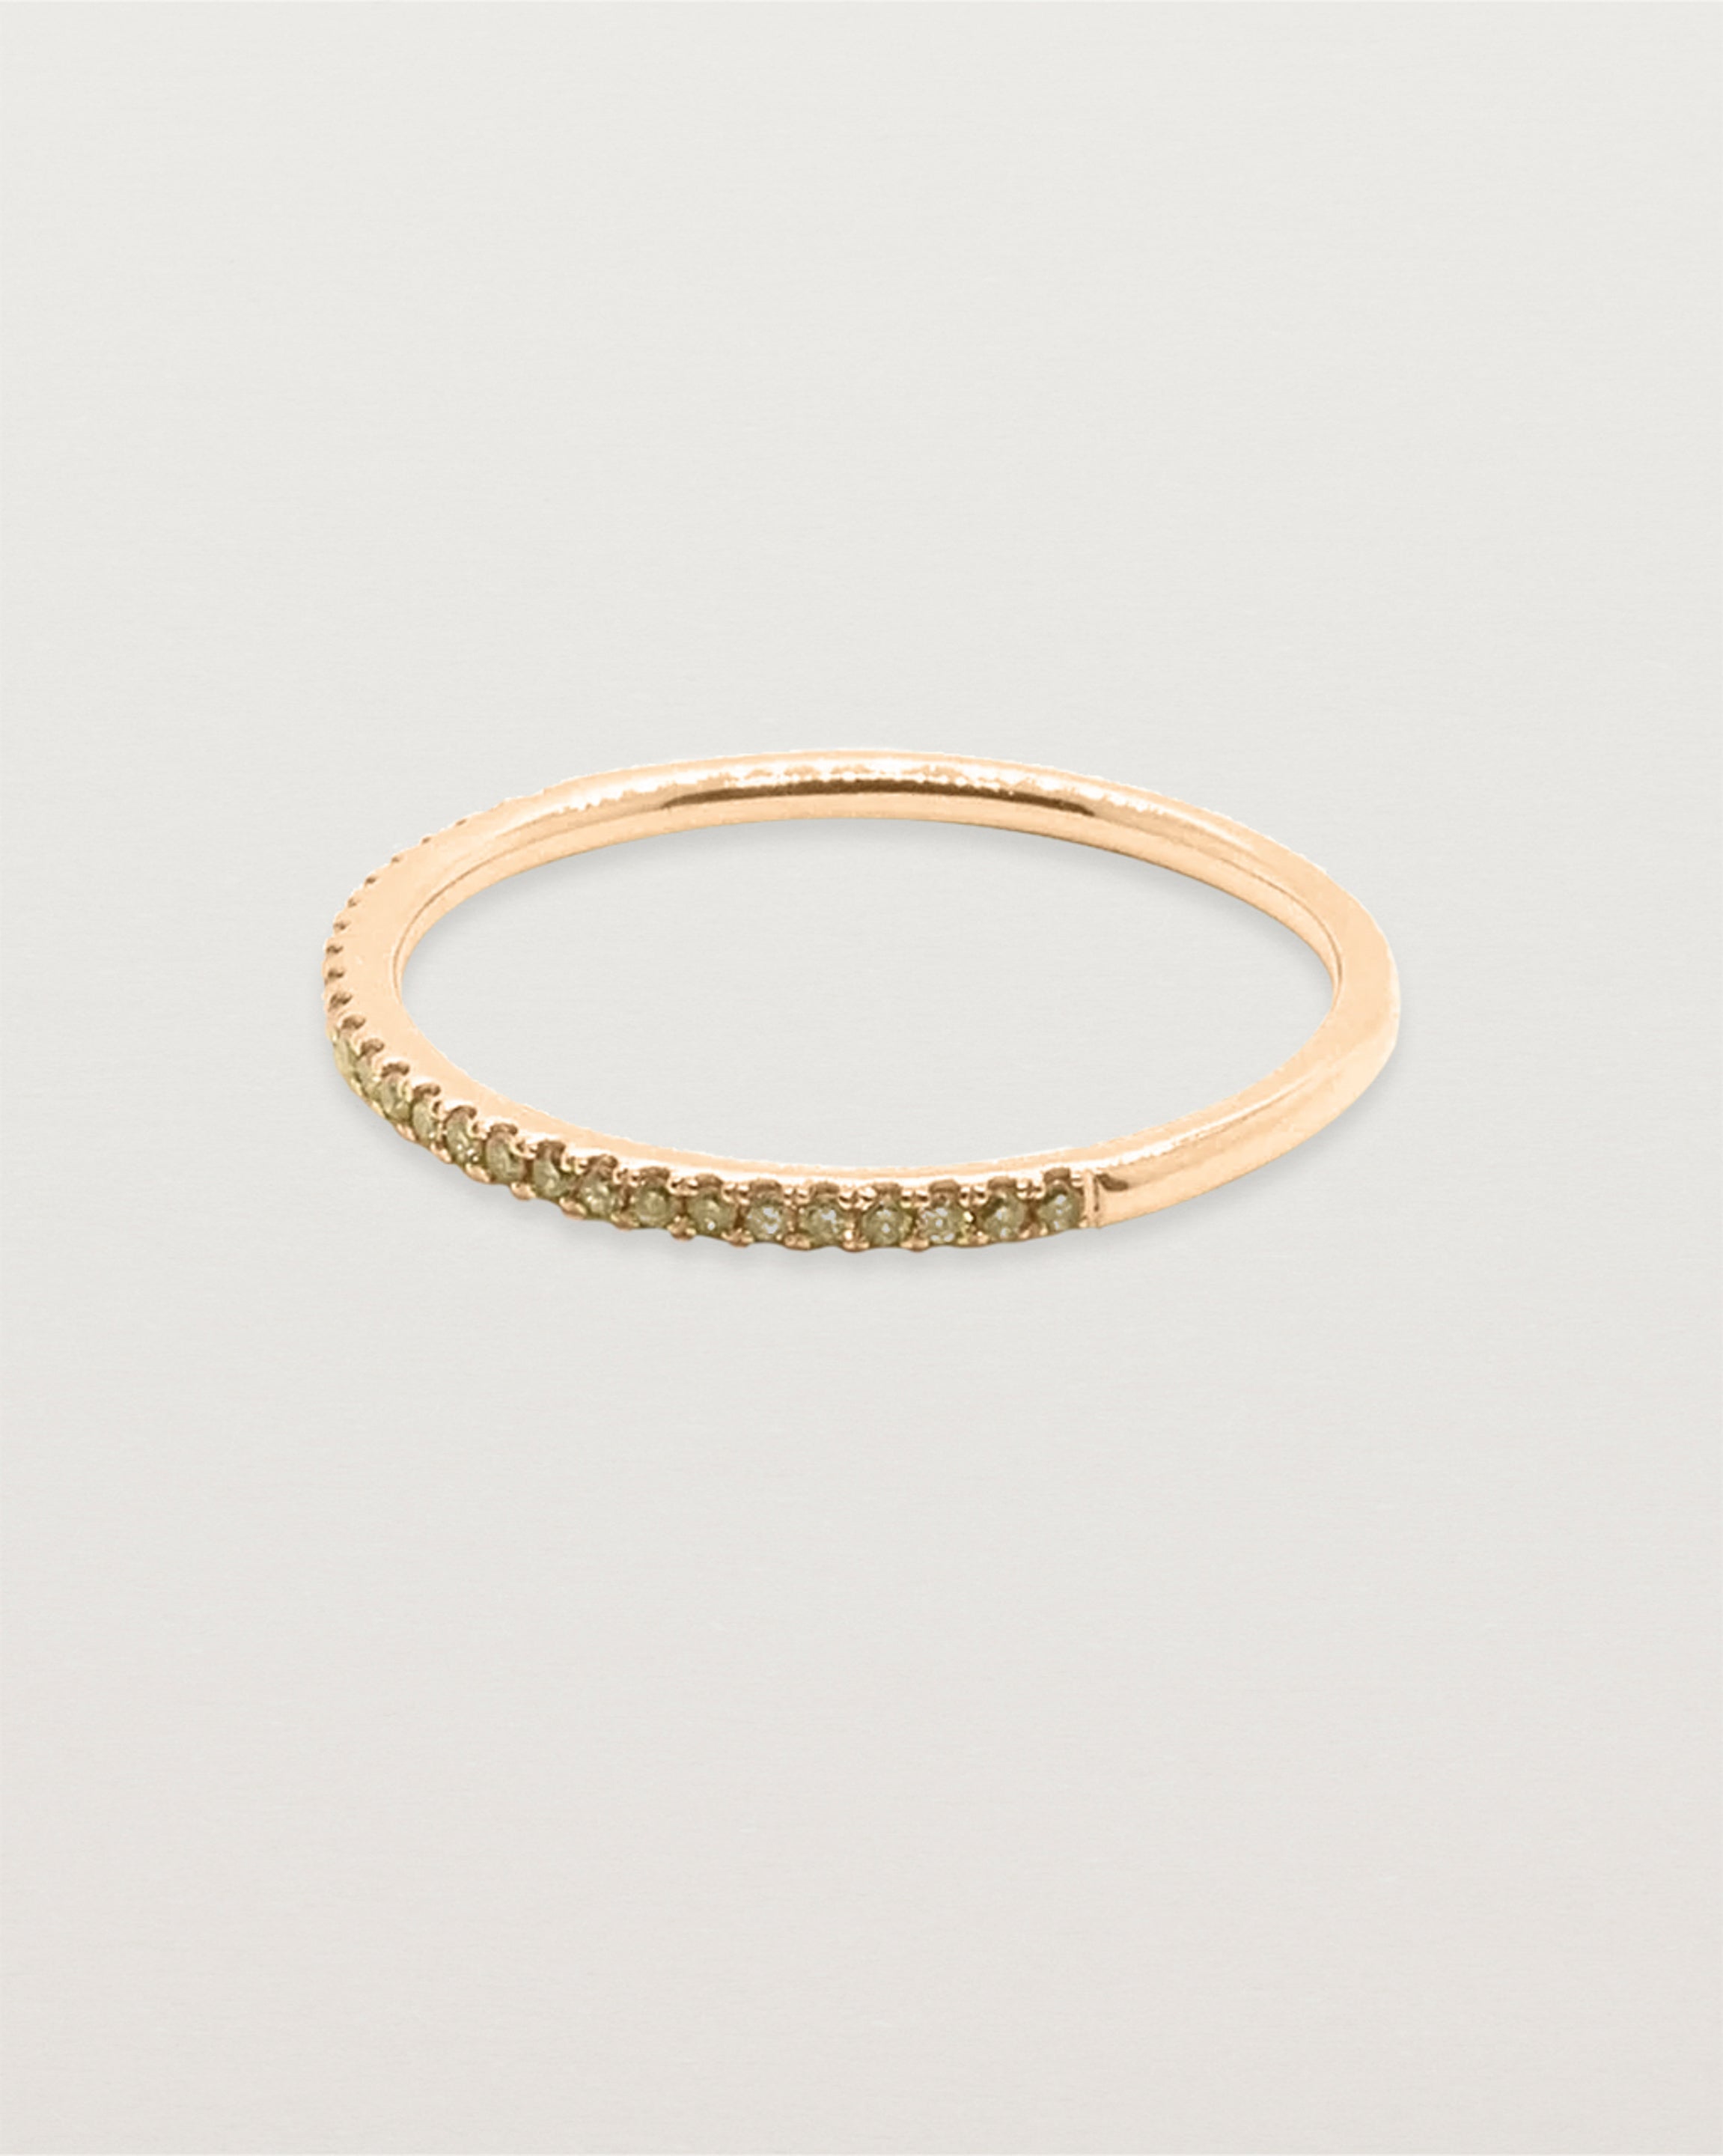 A half band of champagne diamond set on a rose gold band